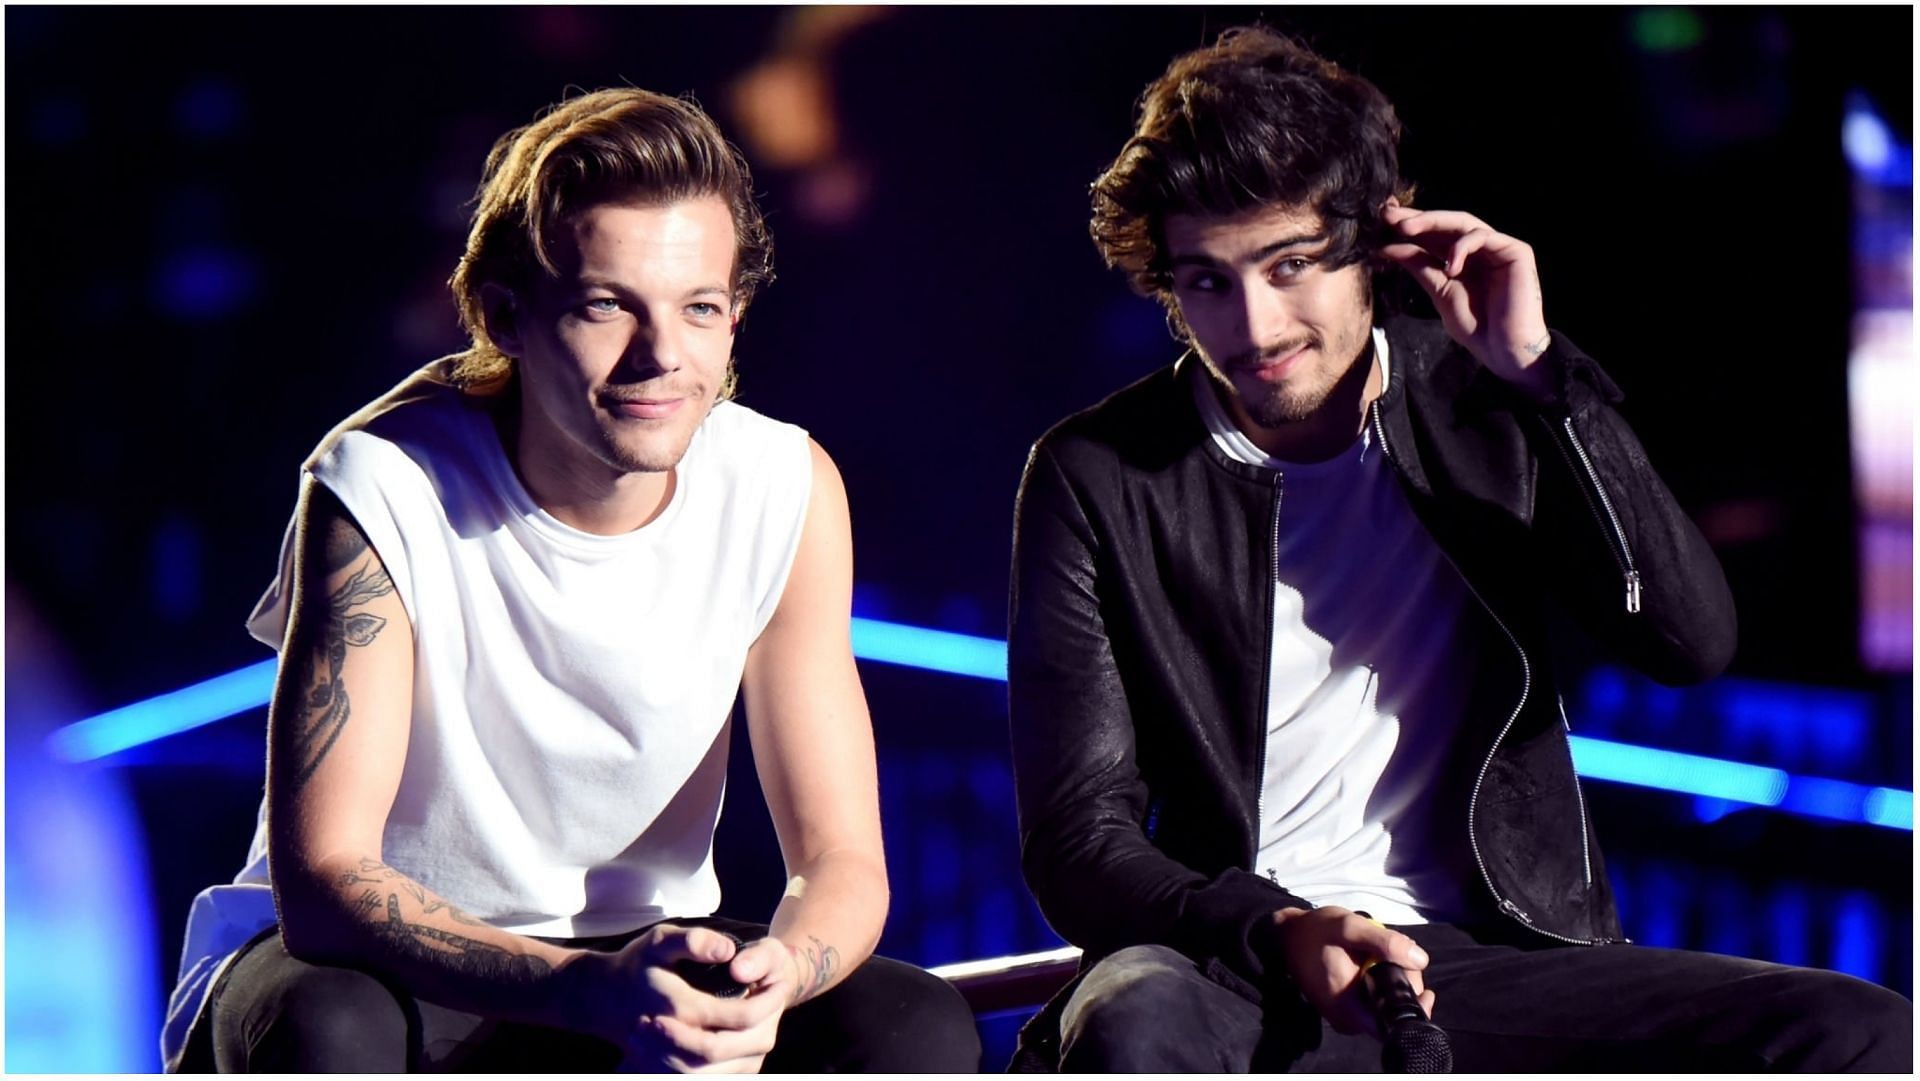 Louis Tomlinson and Zayn Malik&#039;s dispute started in 2015 (Image via Jeff Kravitz/Getty Images)